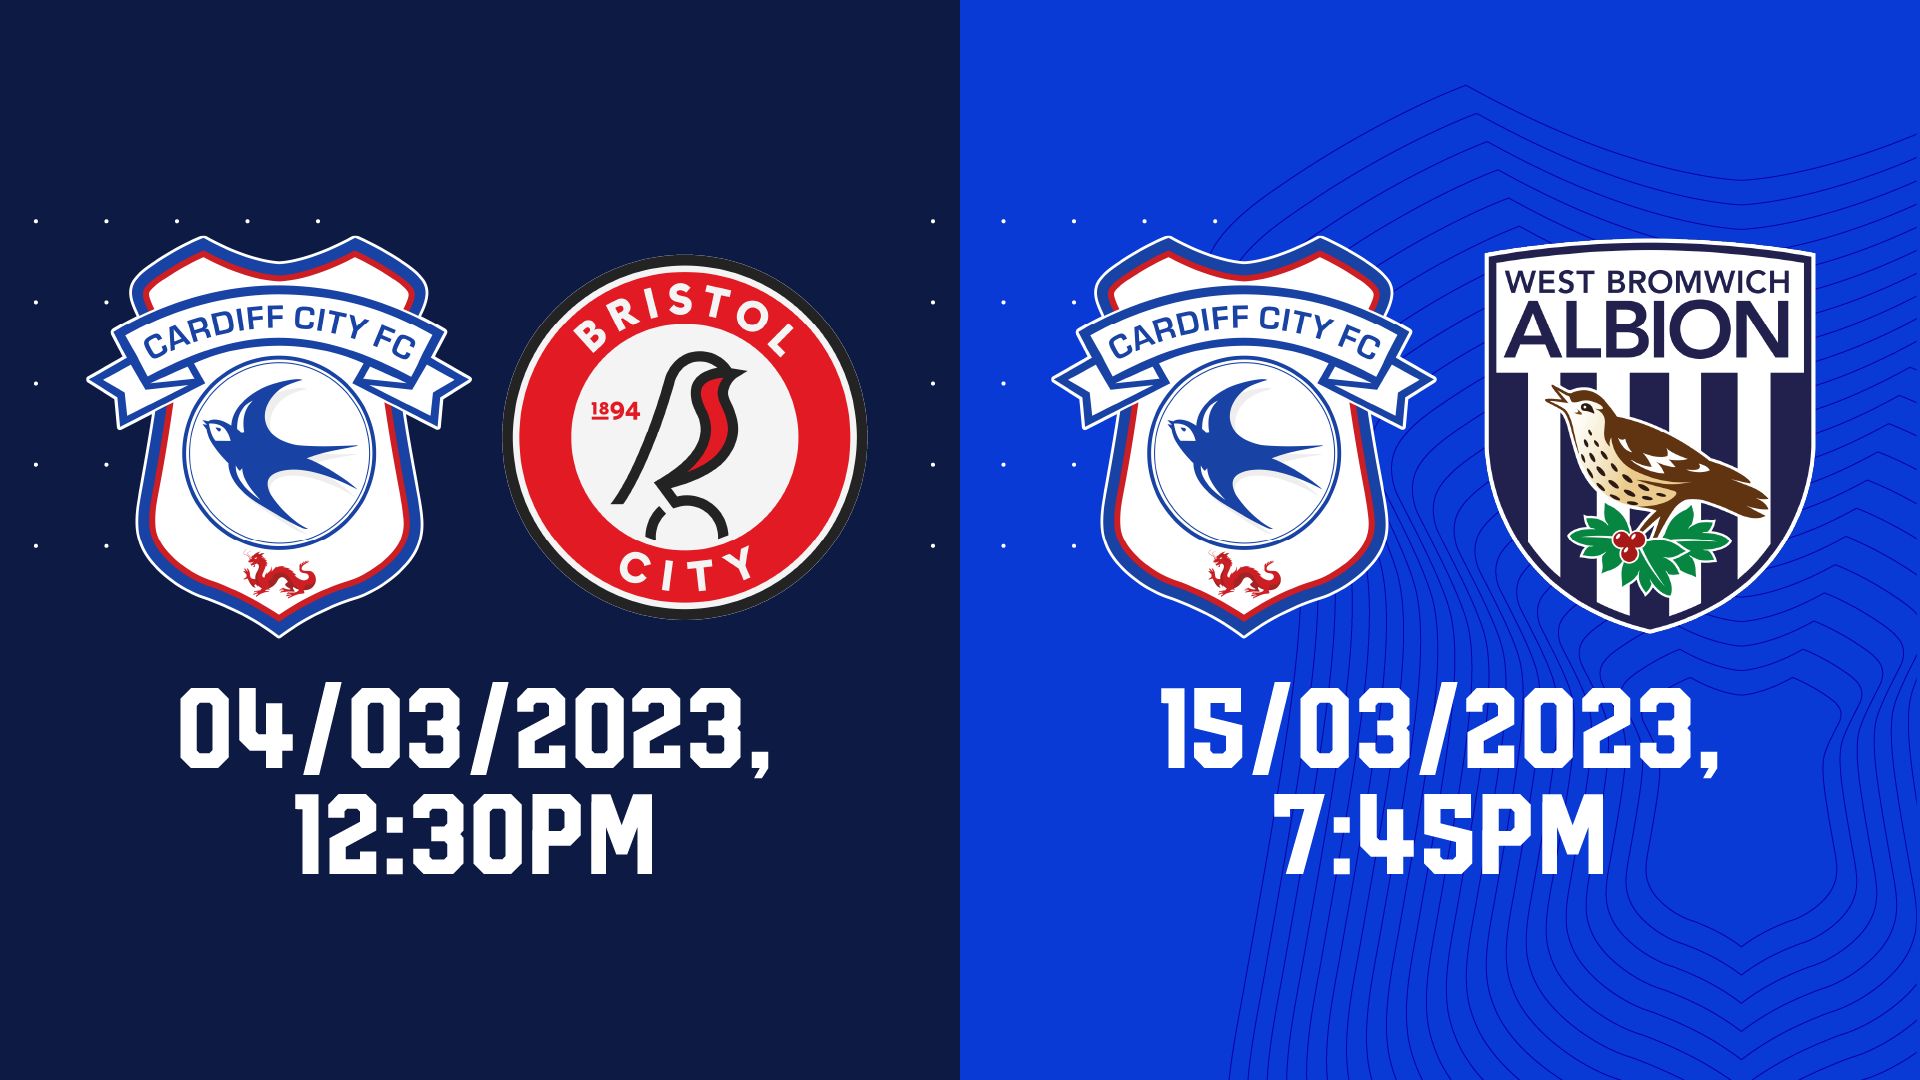 March home fixtures